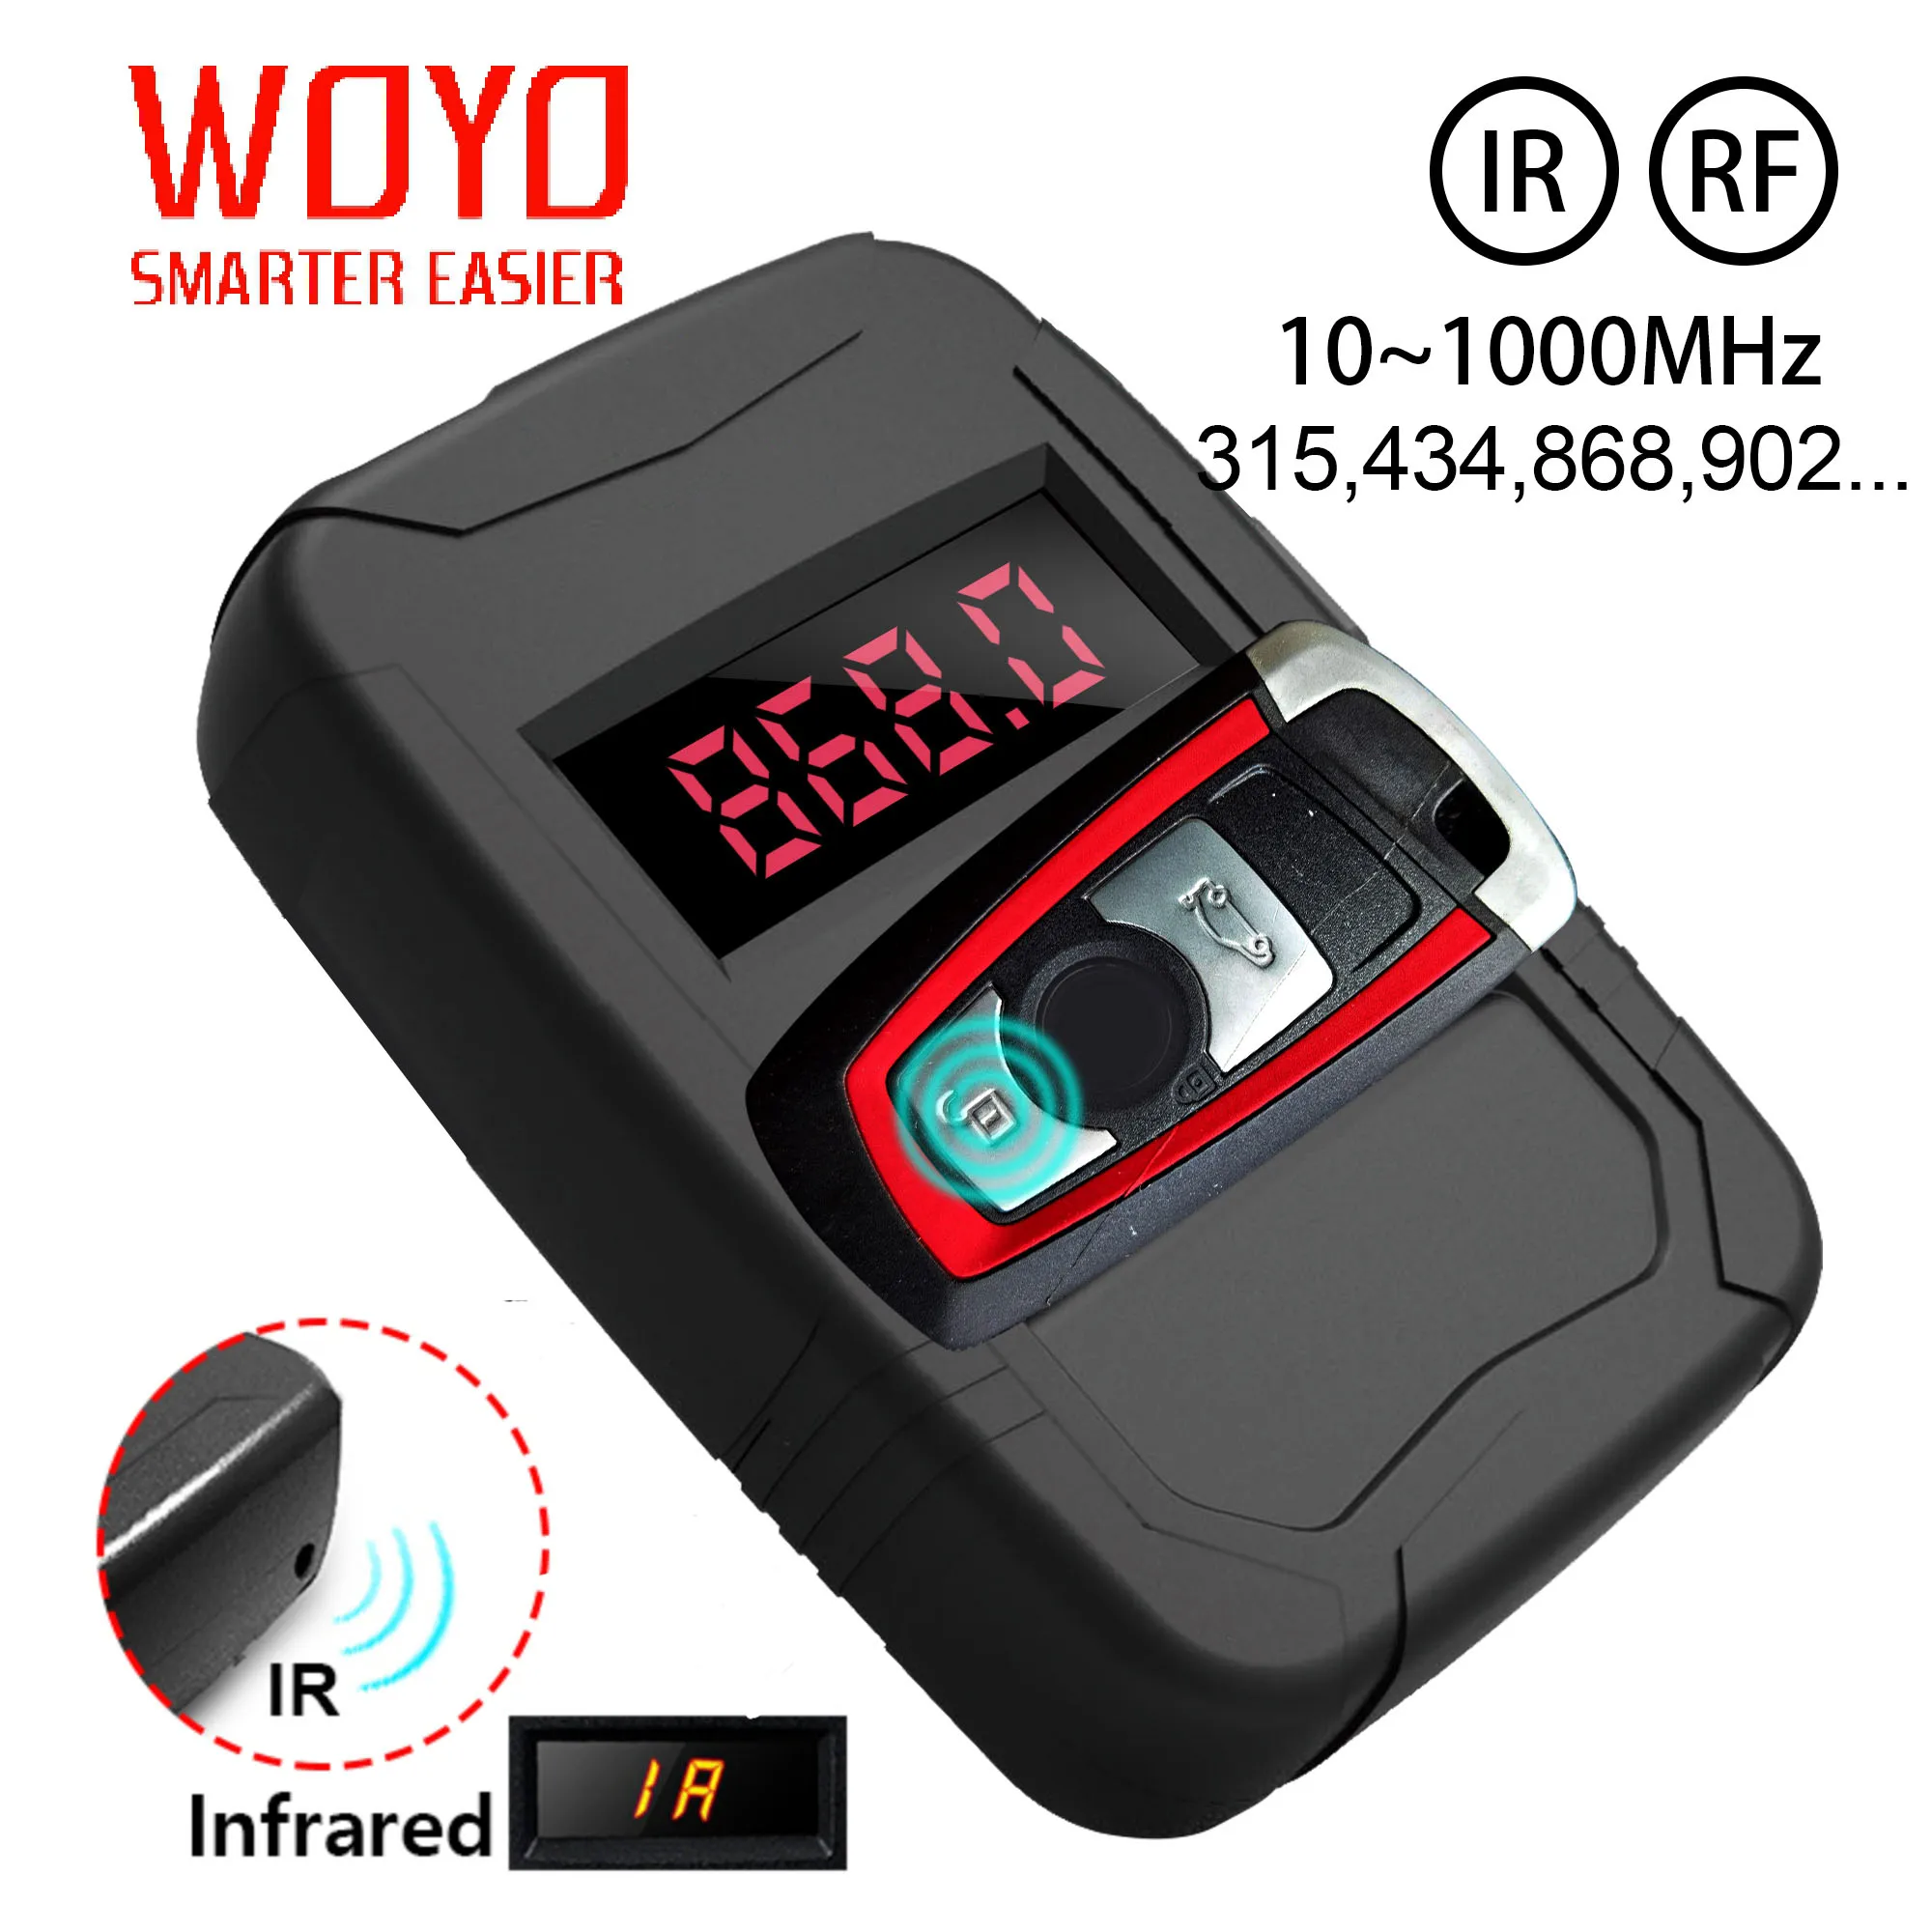 WOYO 10-1000MHZ For All Car Key Frequence Tester Remote Control Detector, IR RF Door TV Remote Inspection Tools, 315,433,868MHZ